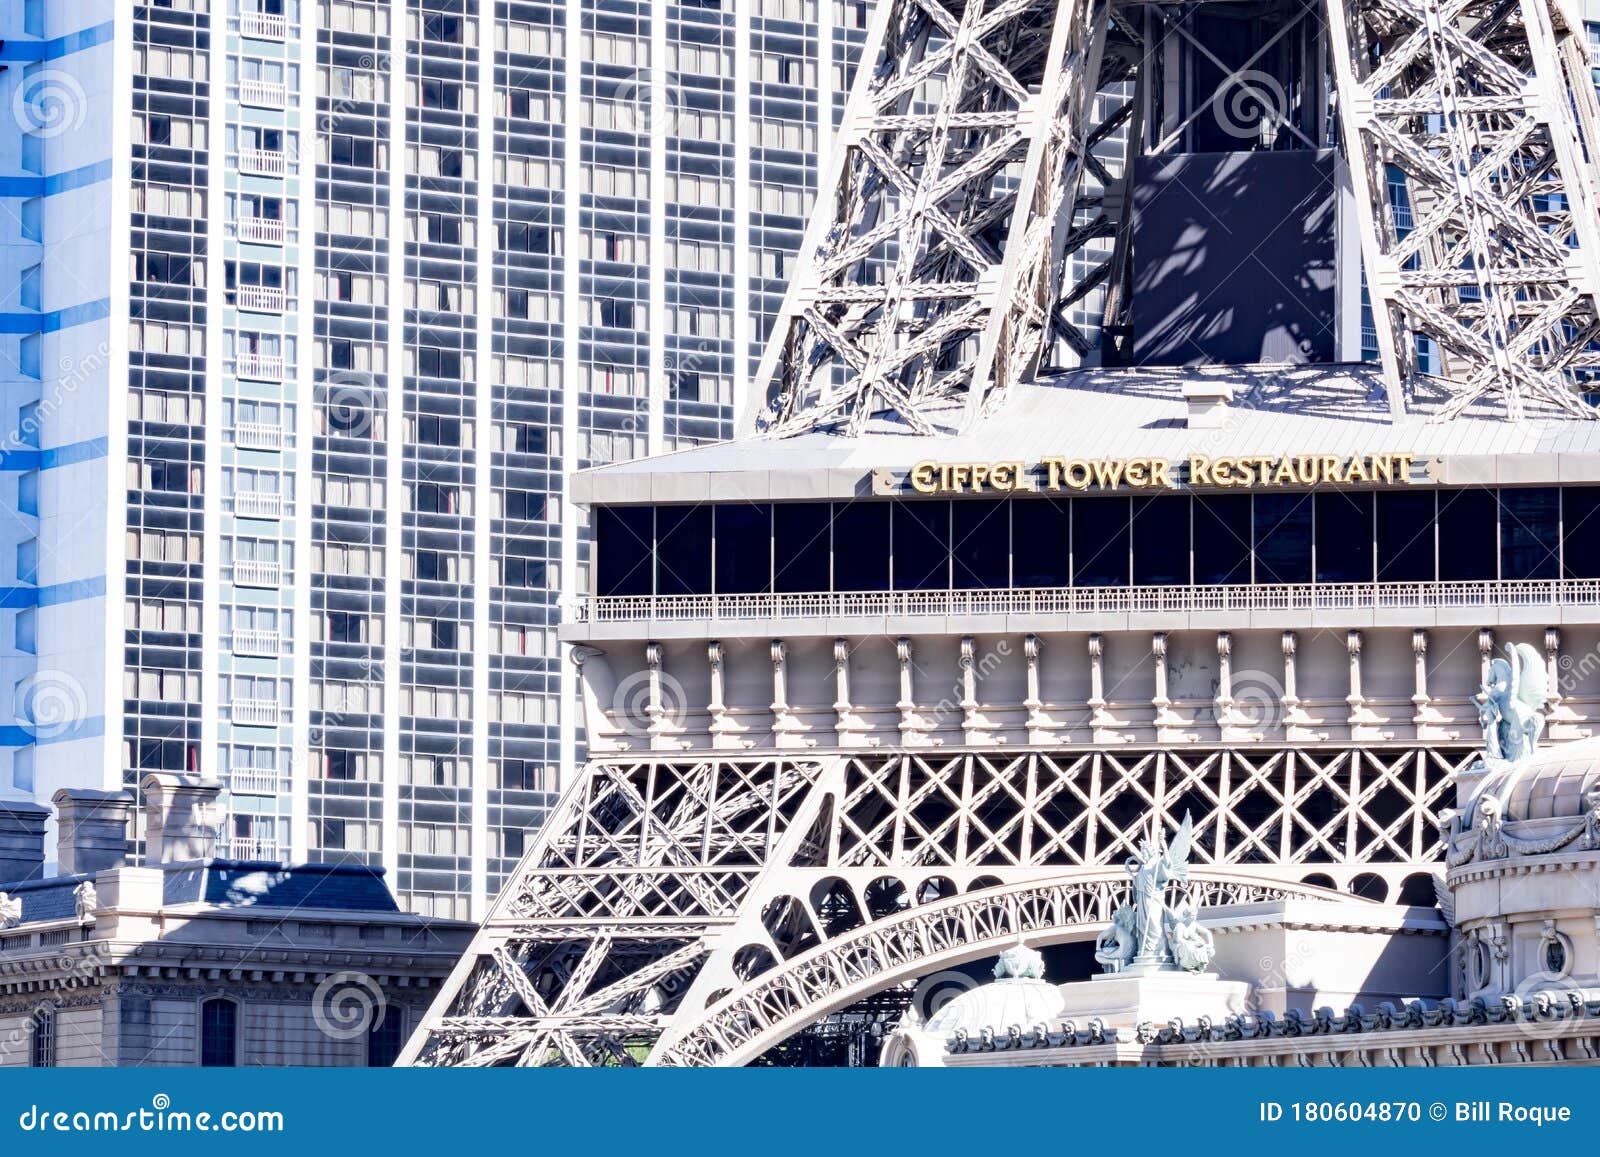 Eiffel Tower Viewing Deck, Las Vegas Nevada USA, March 30, 2020 Editorial  Image - Image of luxury, deck: 180604870